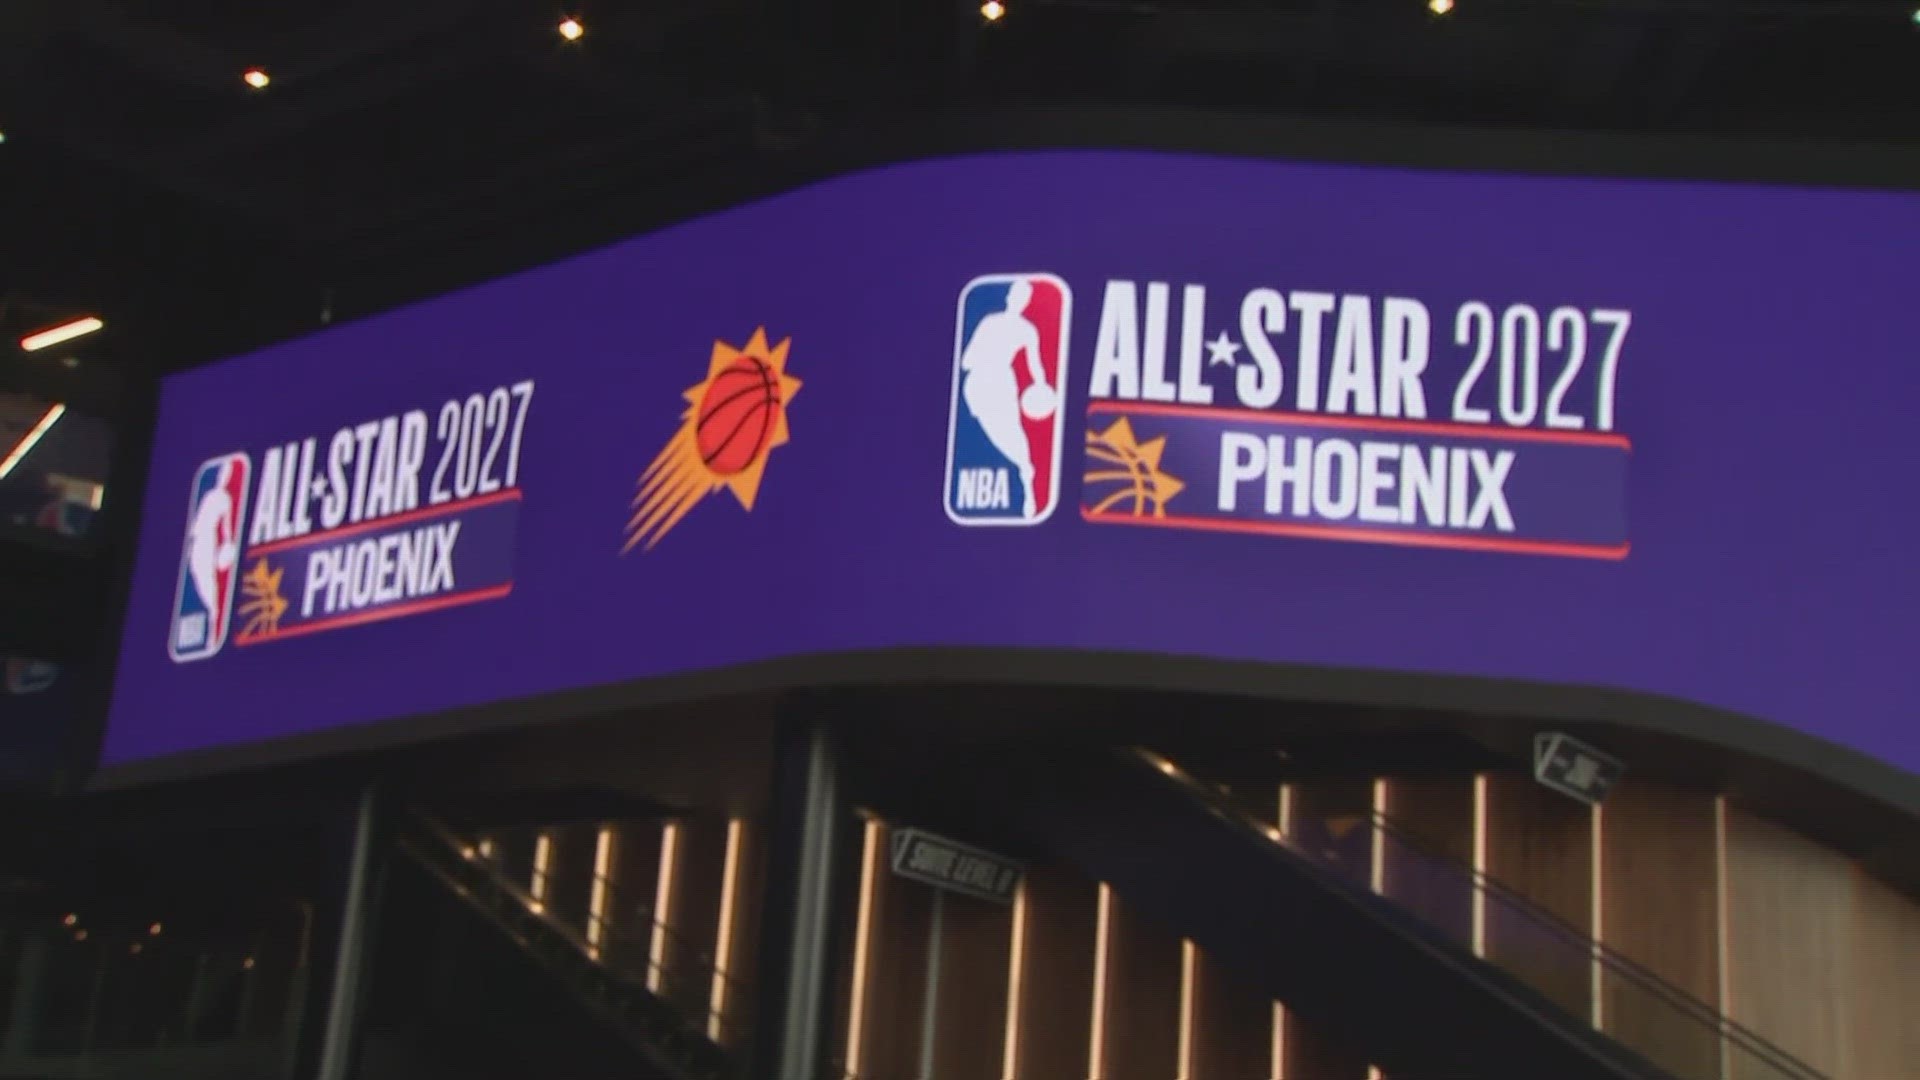 The 76th NBA All-Star Game will take place at Footprint Center on Sunday, Feb. 21, 2027.